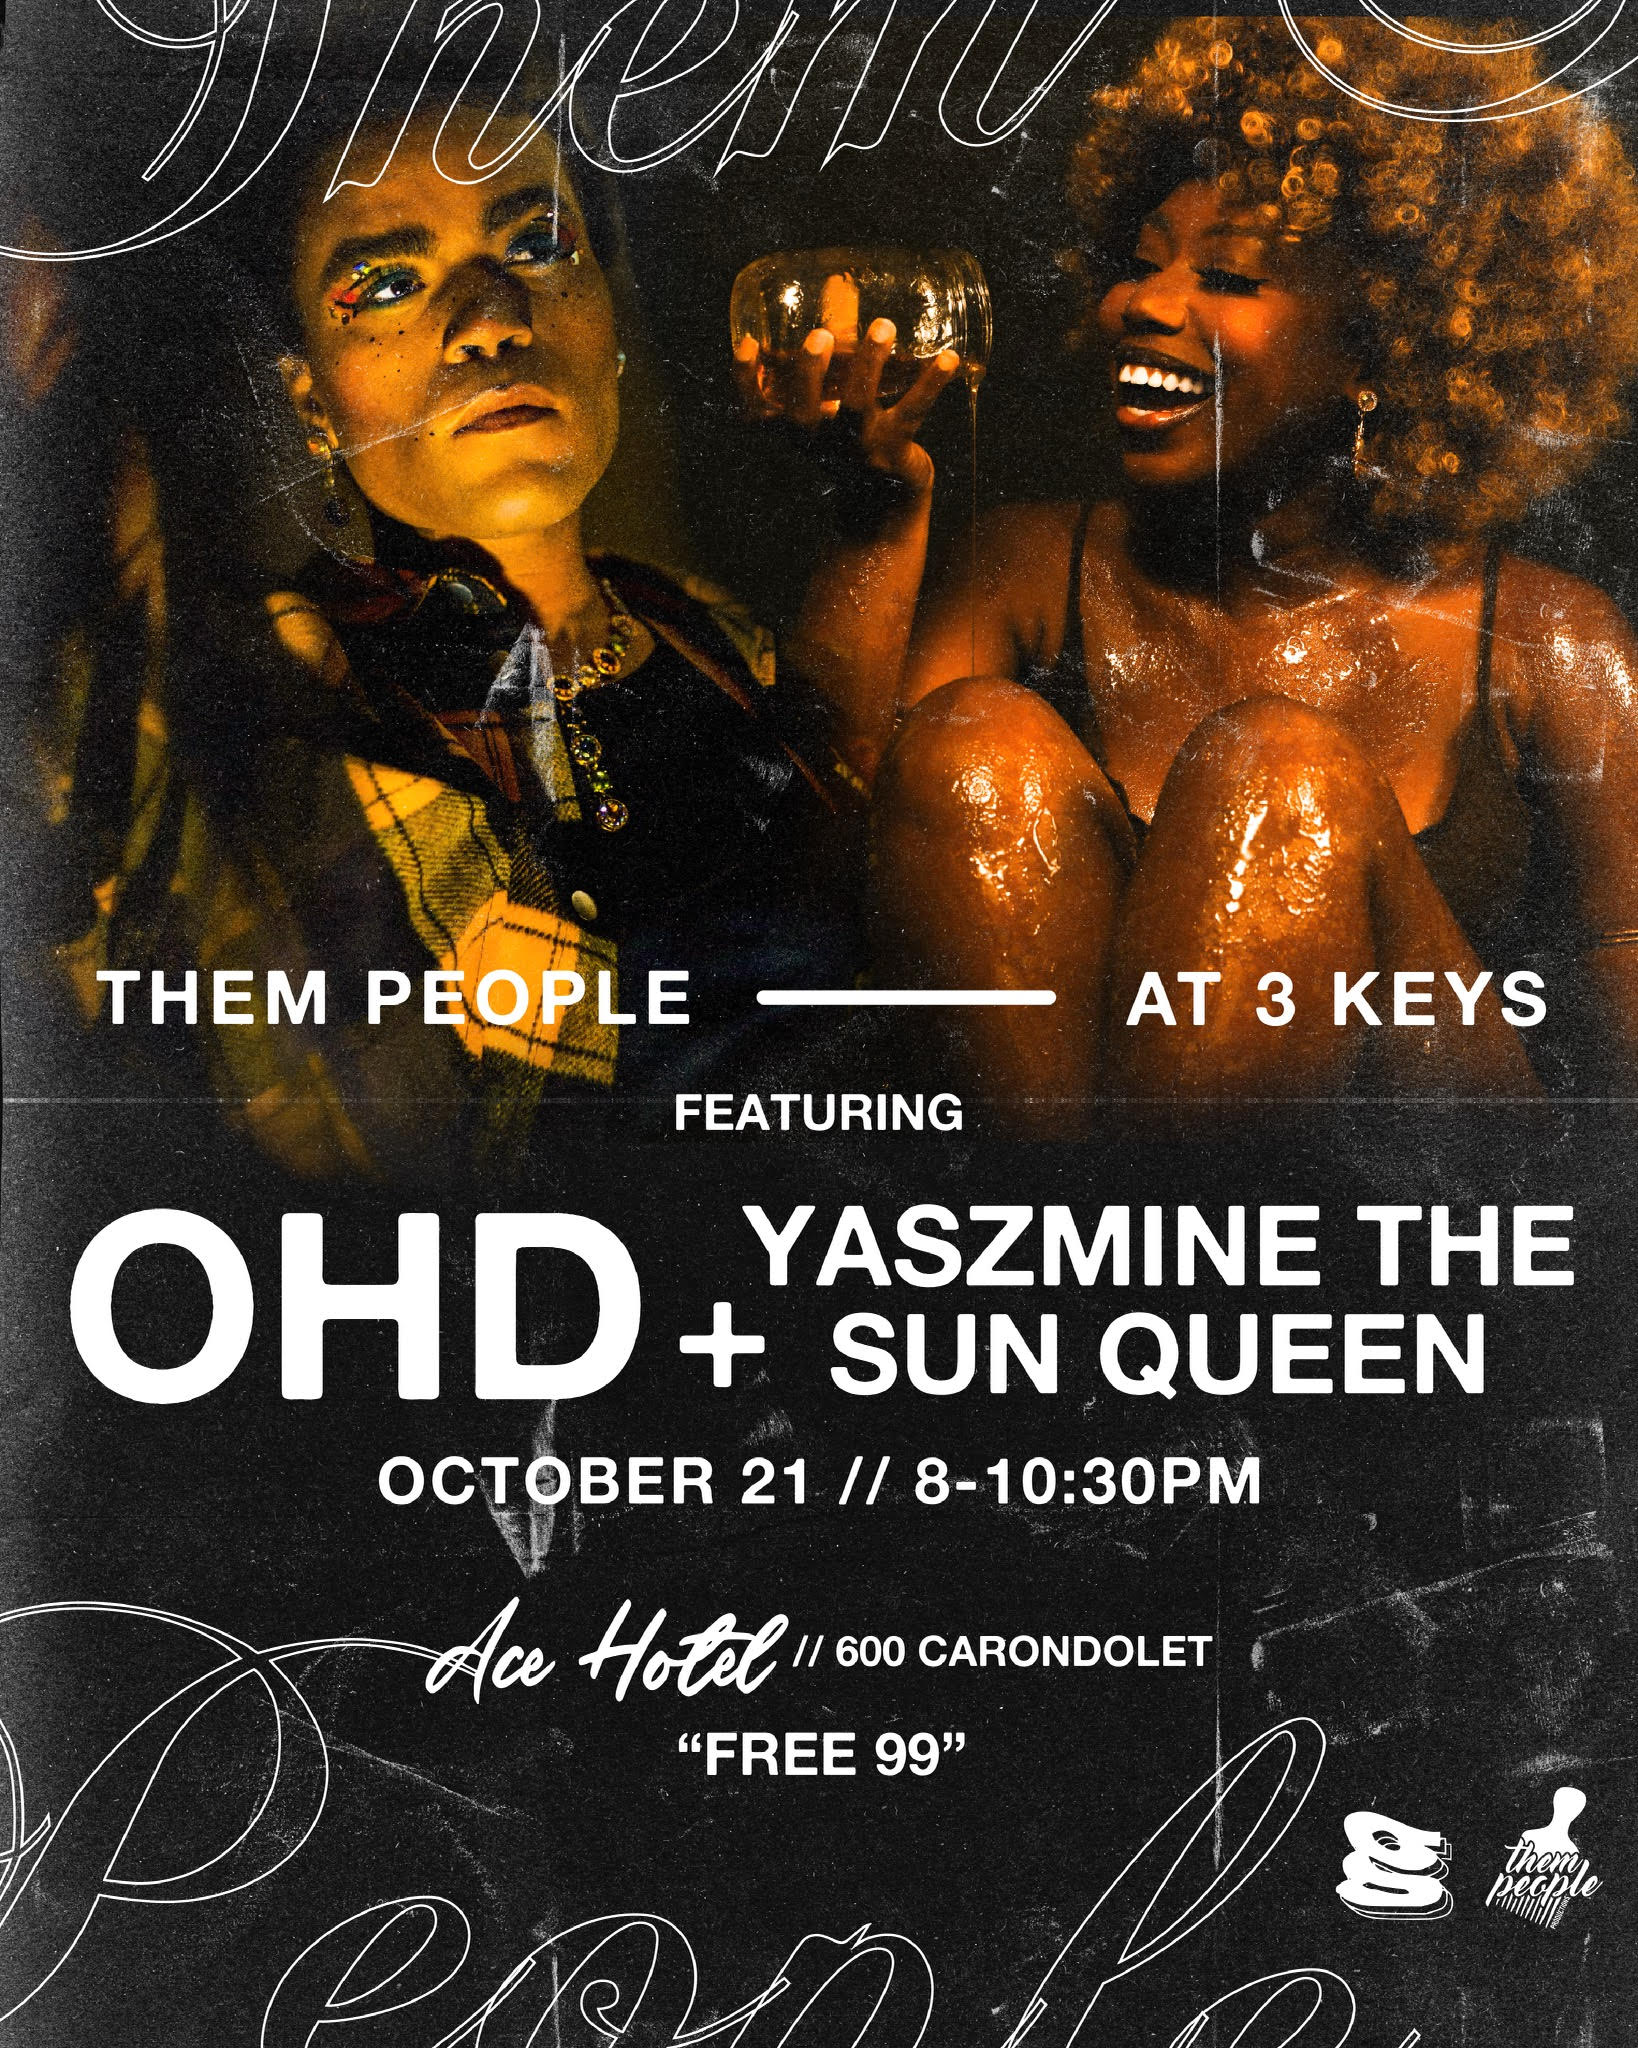 Them People Ft. OHD and Yaszmine The Sun Queen promo